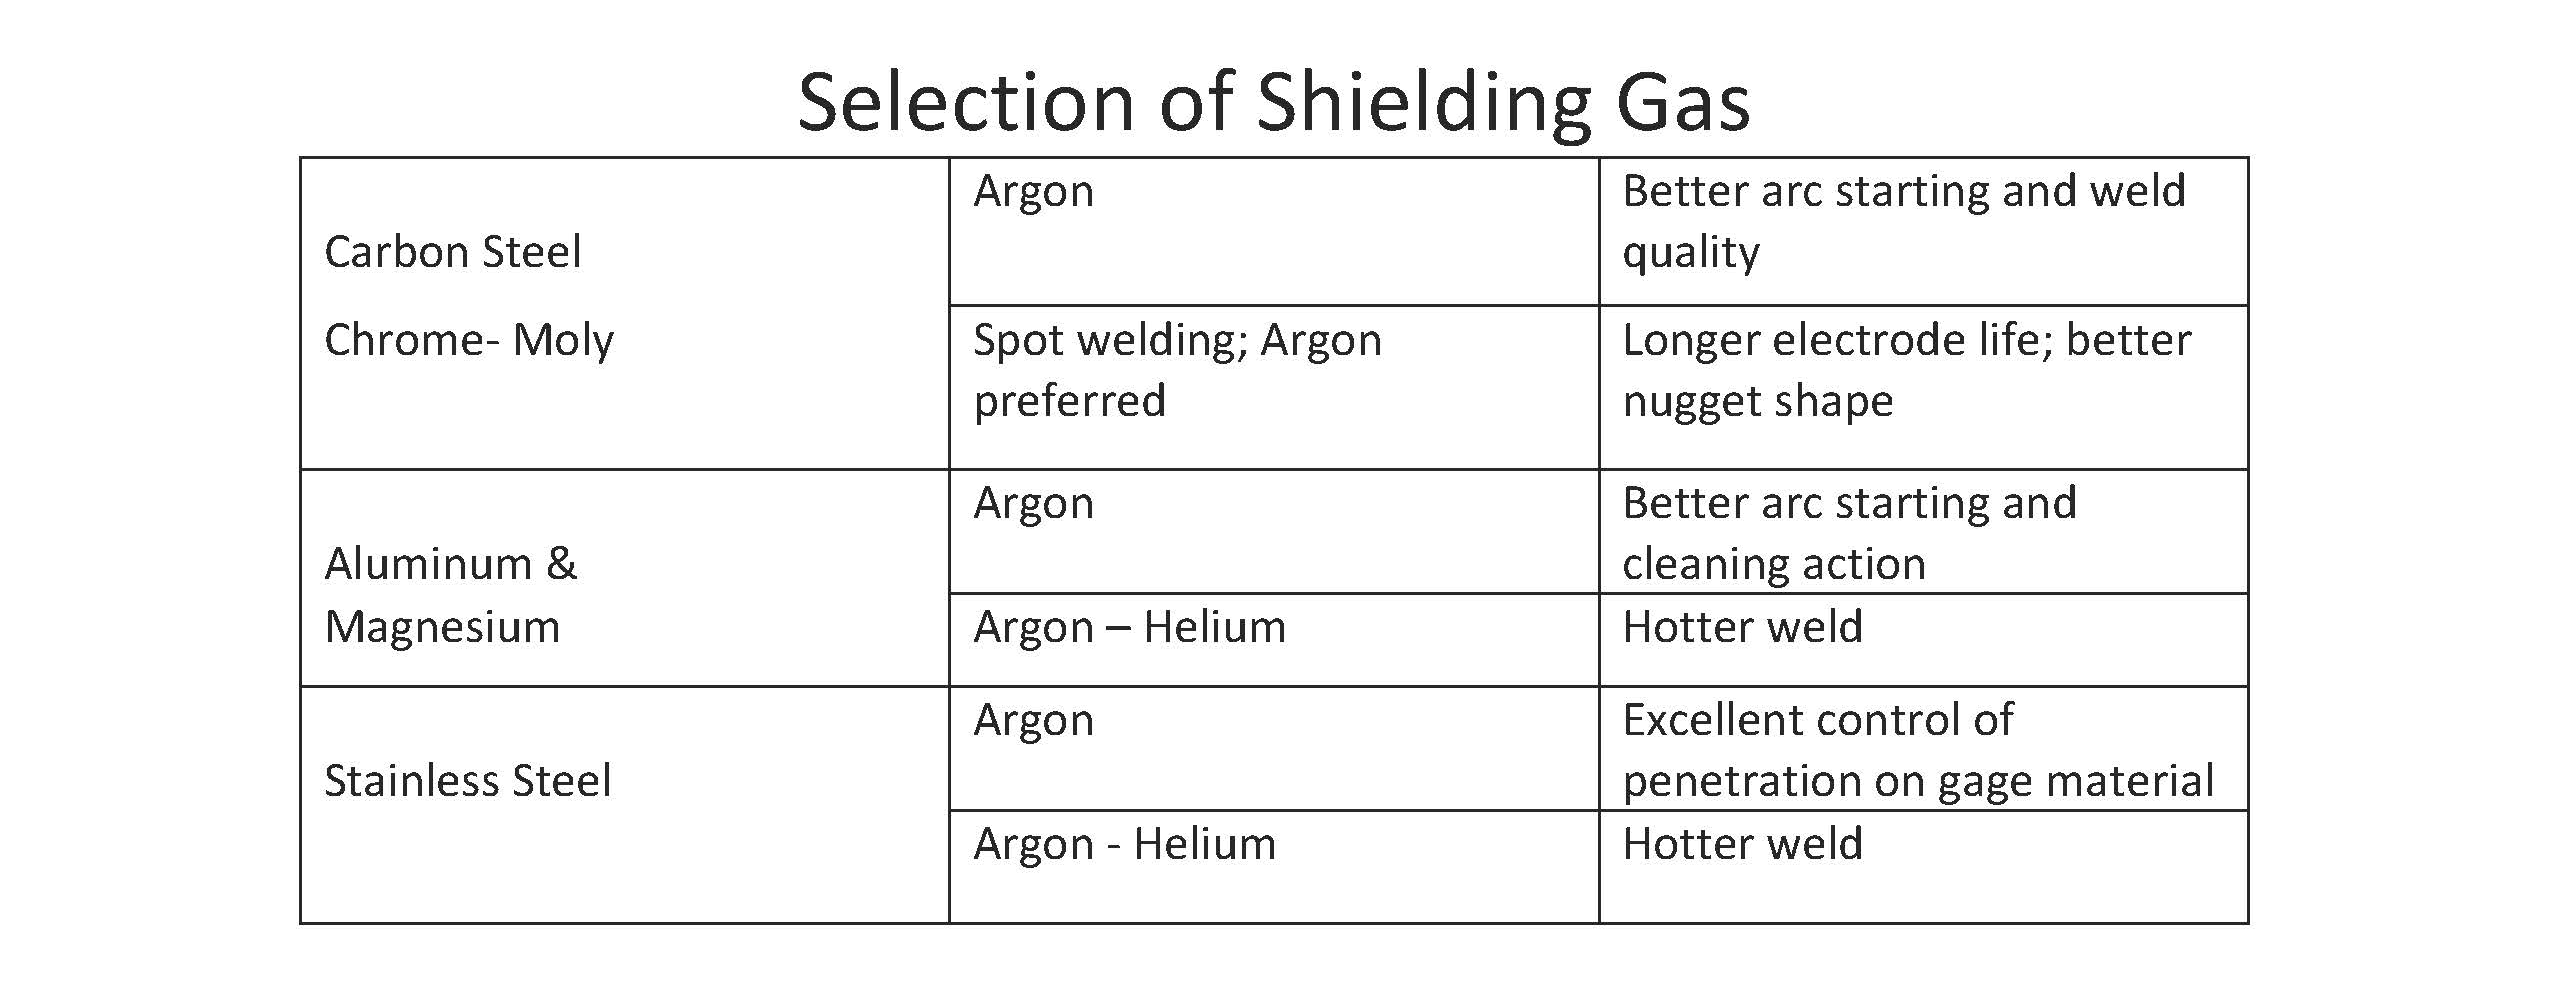 Selecting the Right Shielding Gas For Your Welding Process | Ron ...